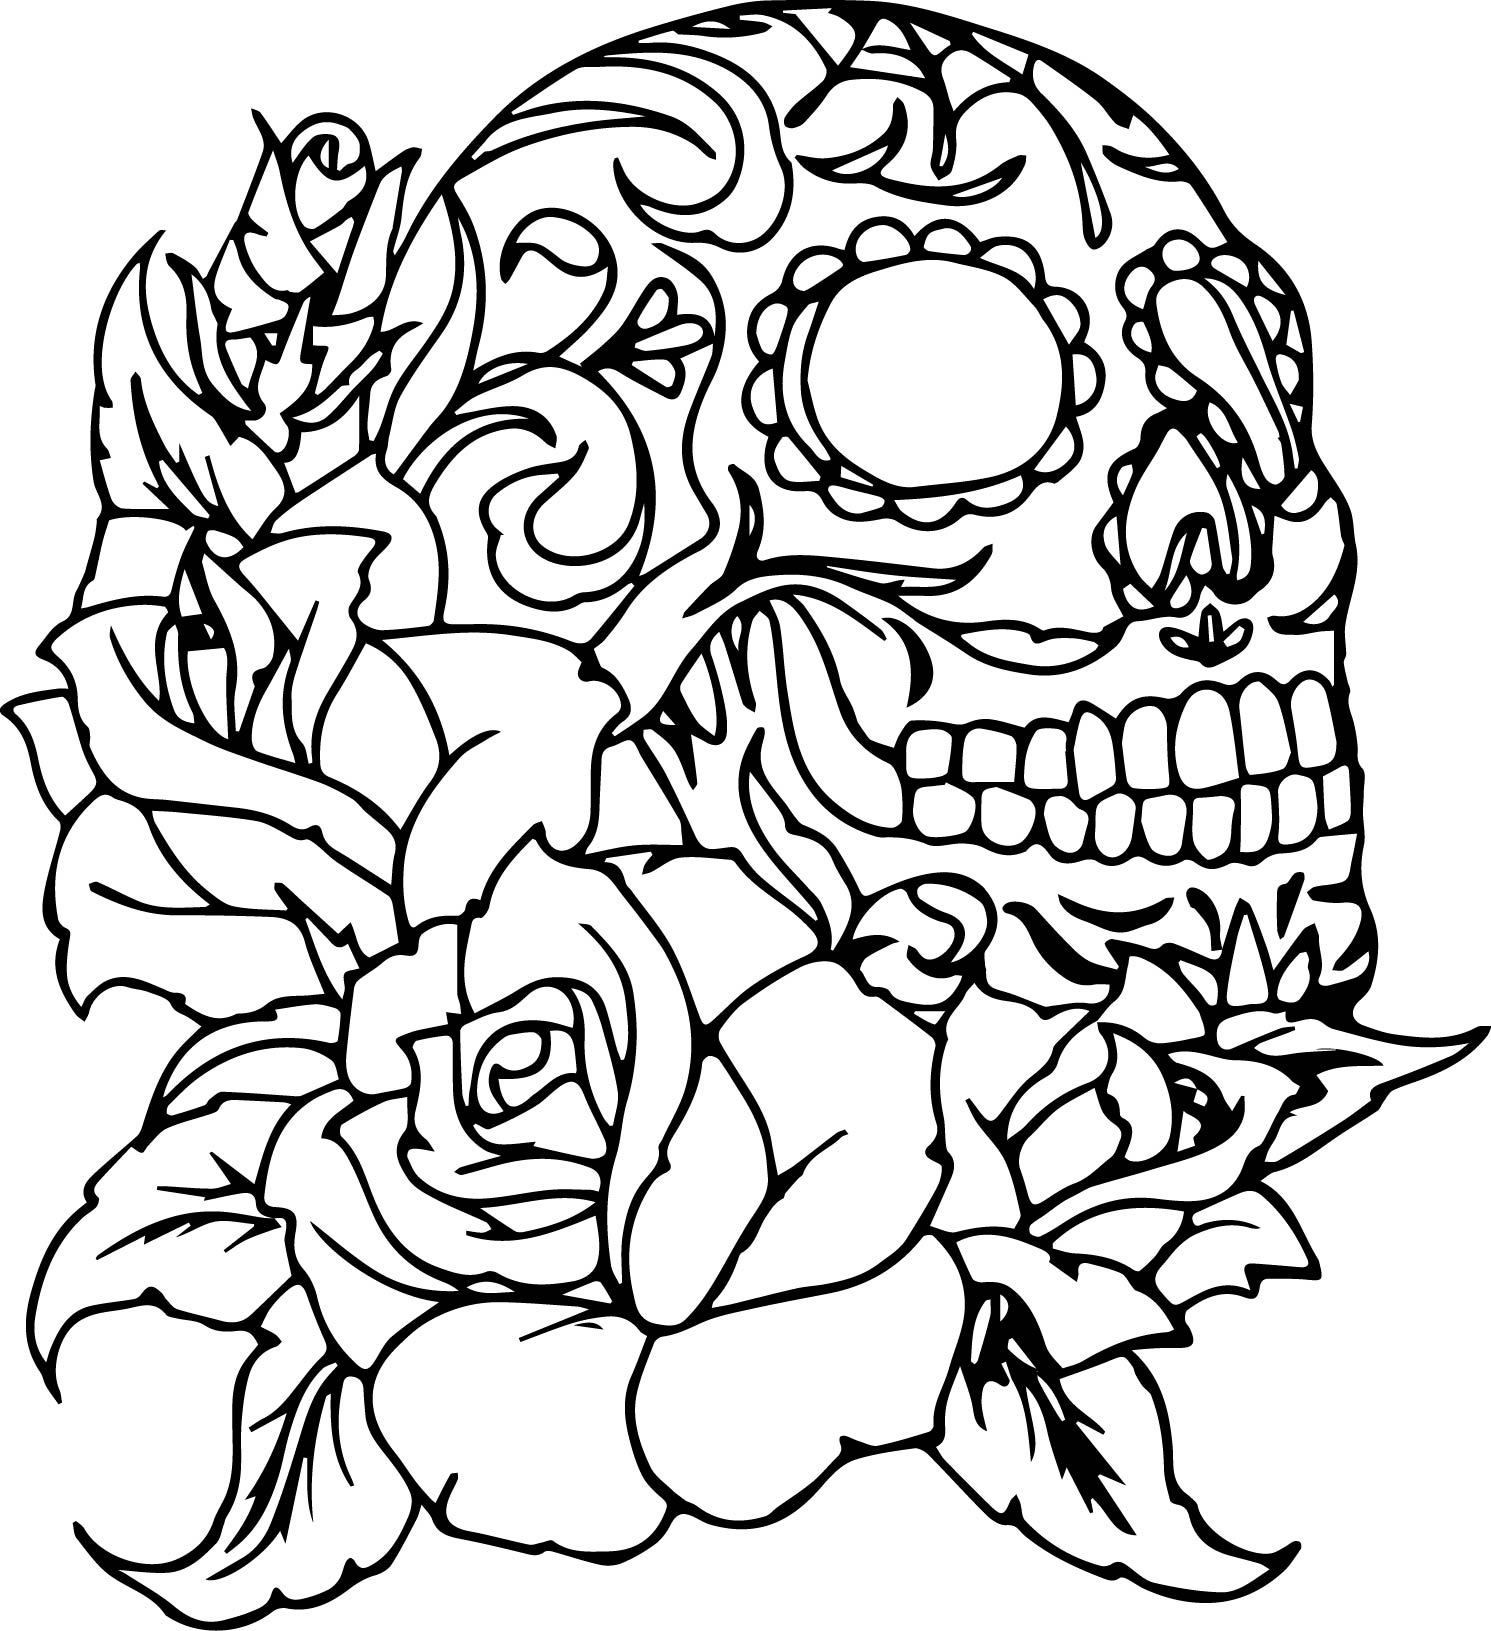 Skull And Roses Coloring Pages at GetDrawings | Free download